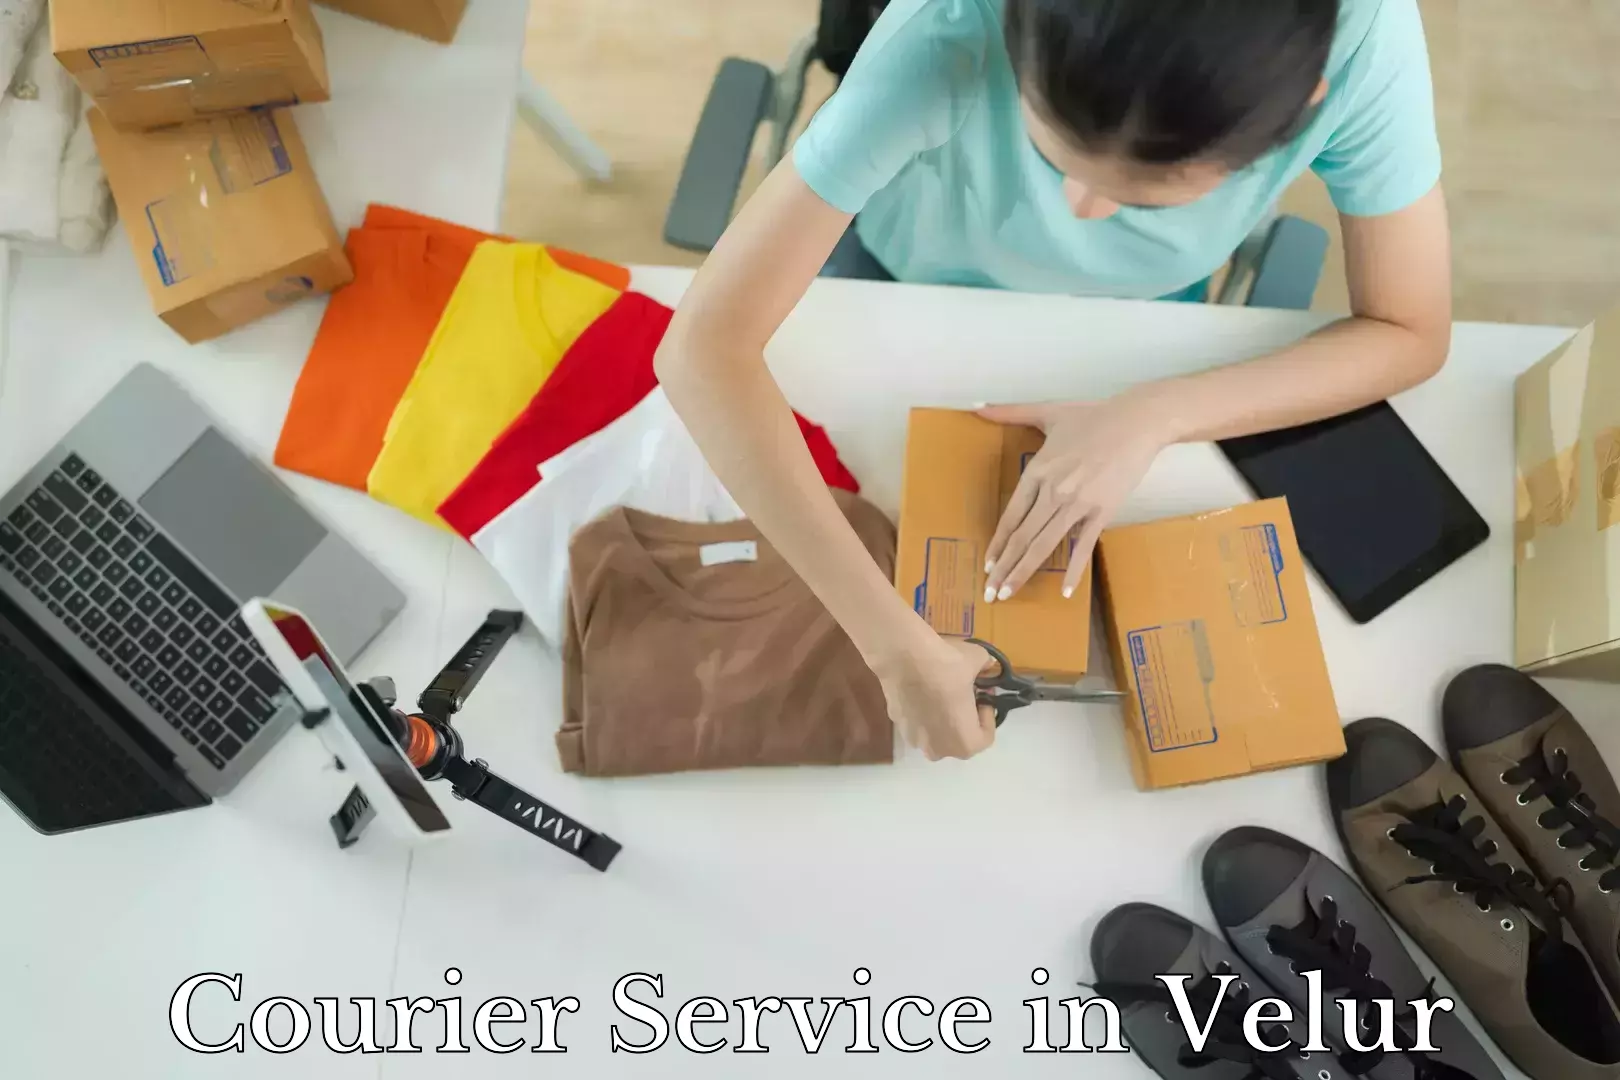 Postal and courier services in Velur